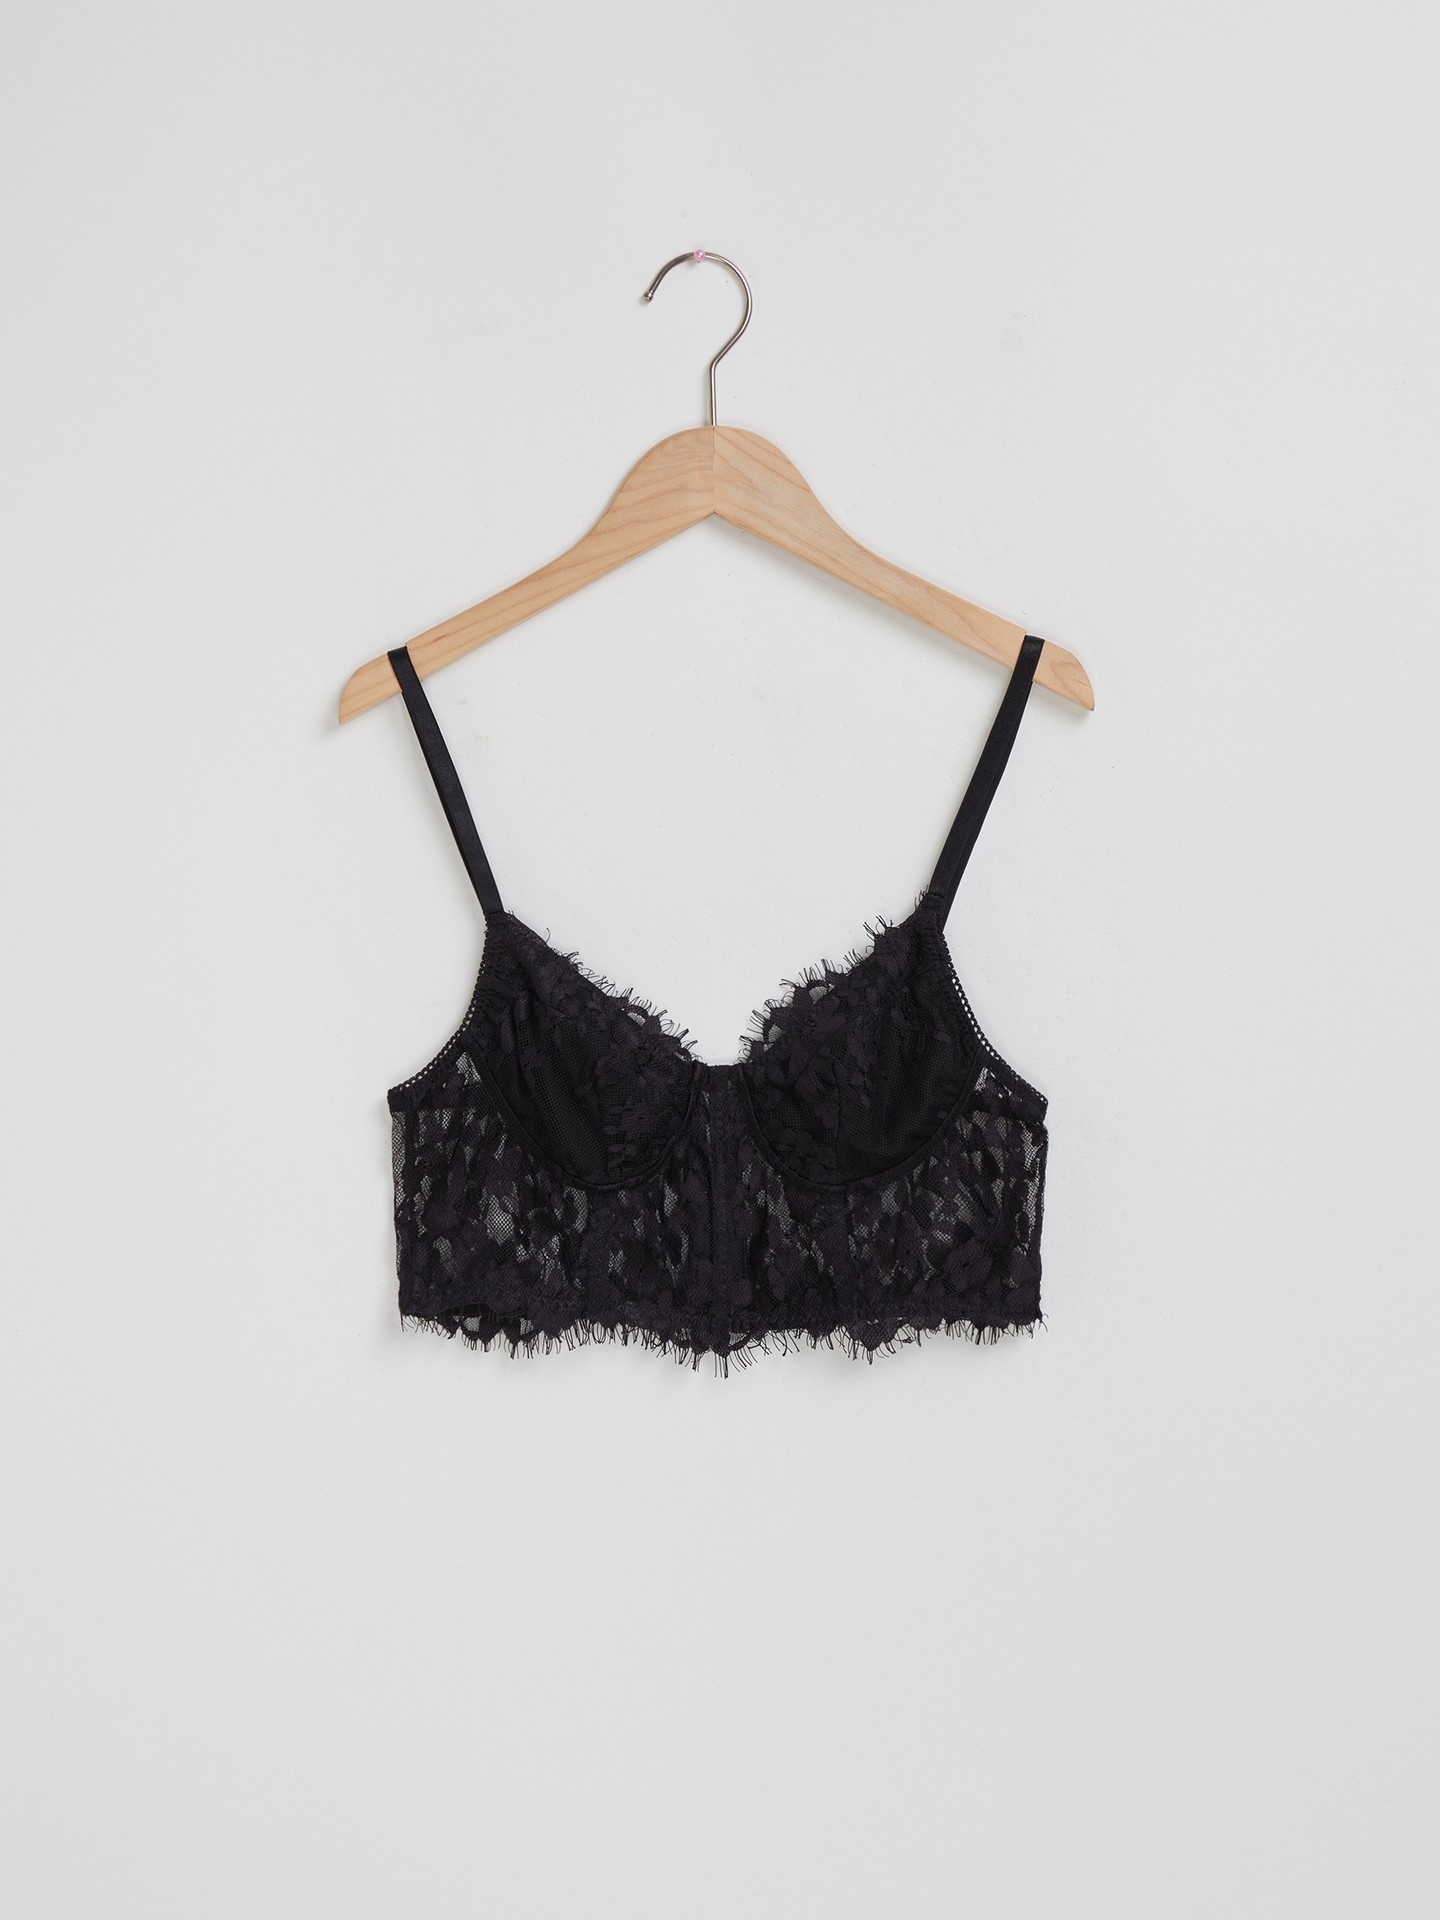 Sexy black lace bralette crop top with a sheer design instagram